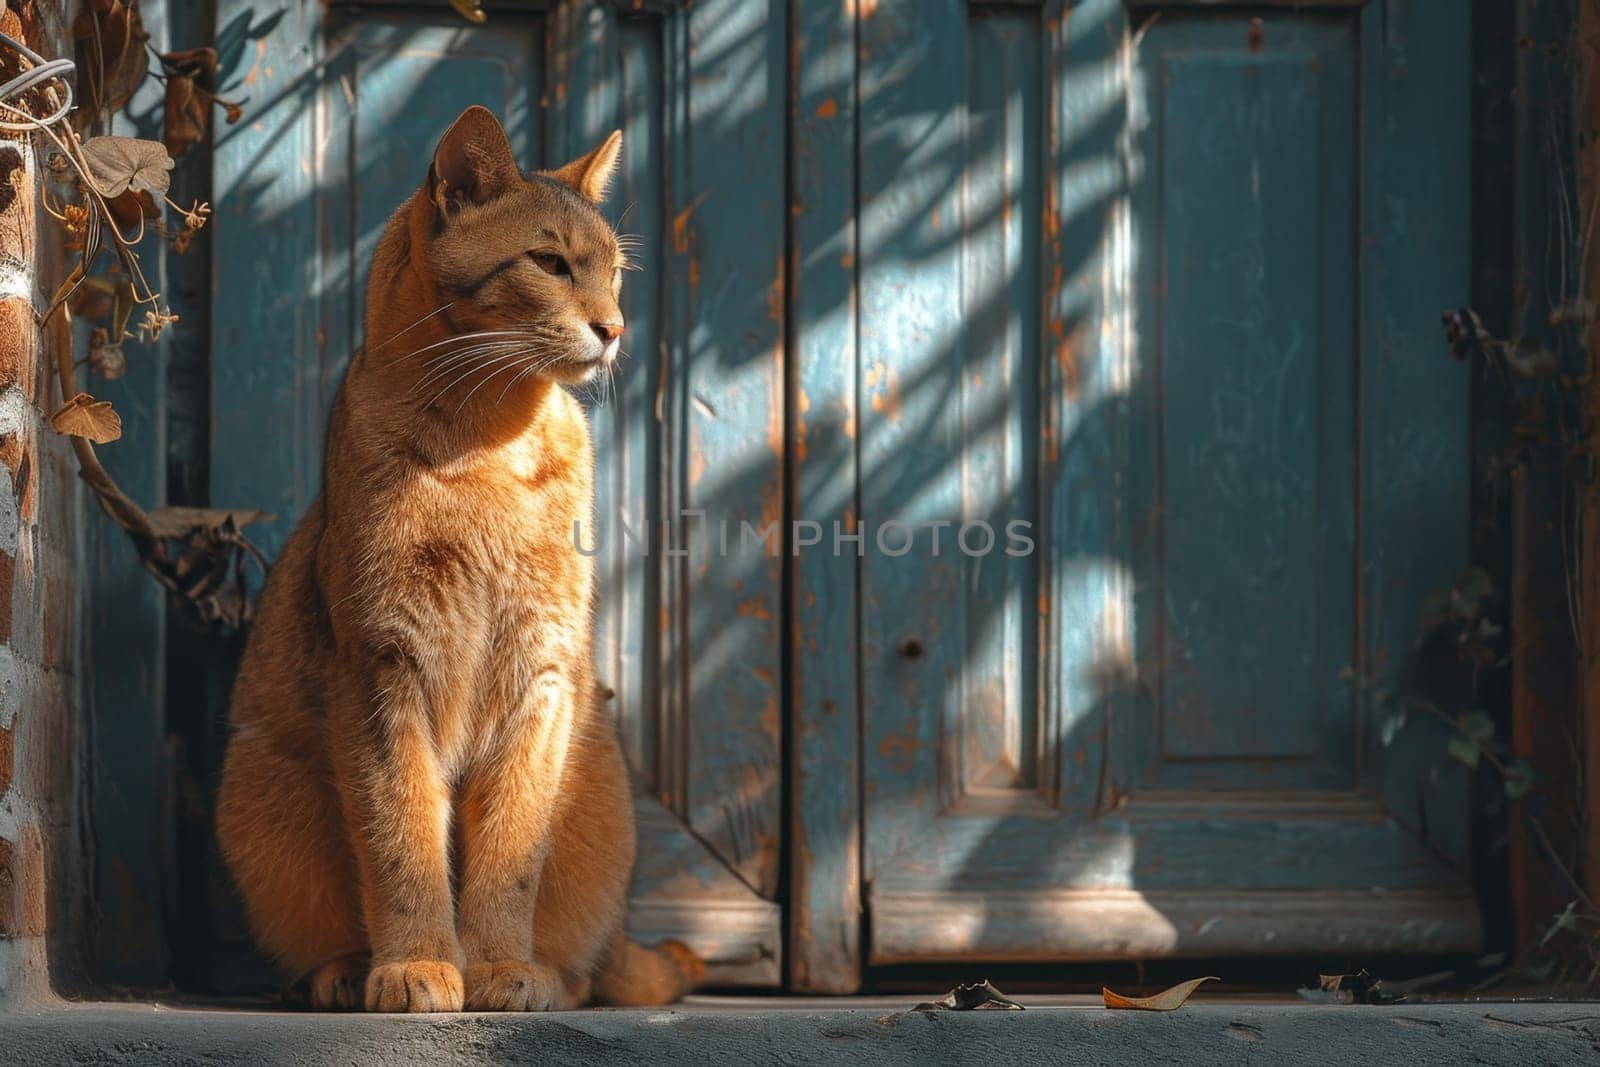 There was a cute red cat sitting near the door, guarding the entrance by Lobachad